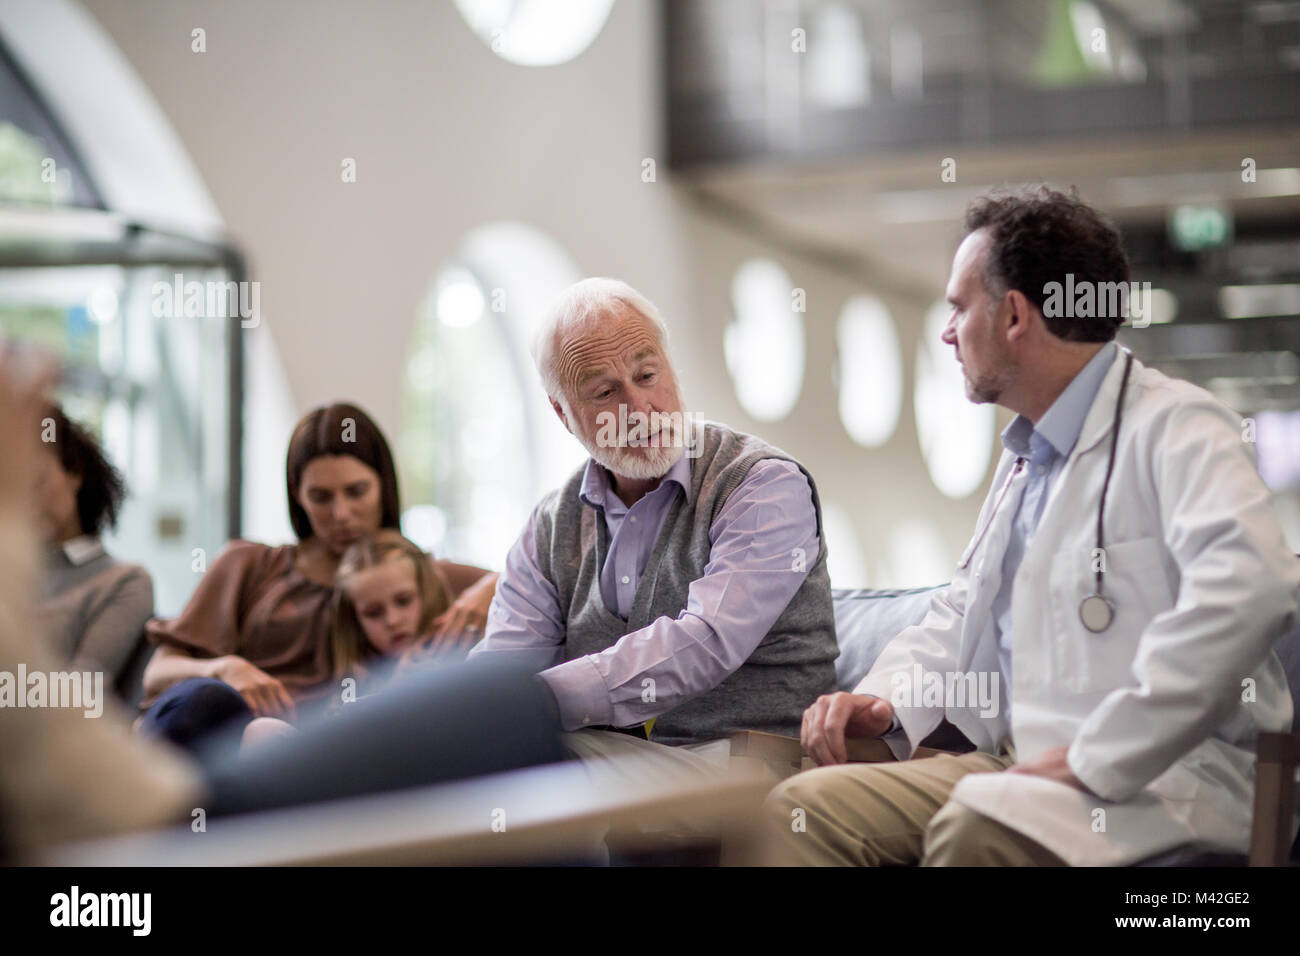 Senior Male talking to Doctor in a crowded hospital waiting room Stock Photo